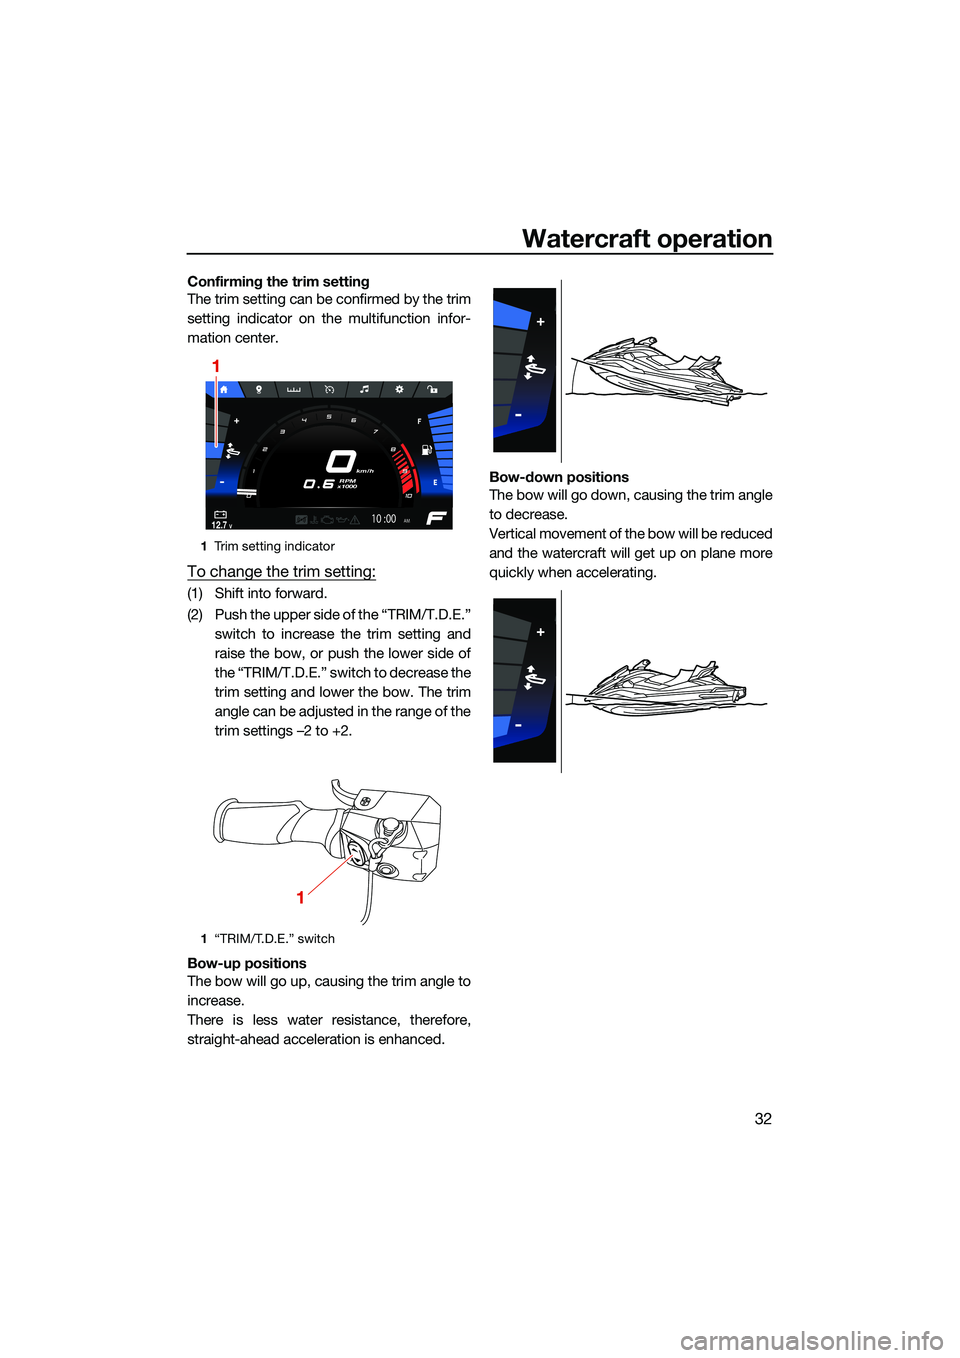 YAMAHA FX HO CRUISER 2022 Service Manual Watercraft operation
32
Confirming the trim setting
The trim setting can be confirmed by the trim
setting indicator on the multifunction infor-
mation center.
To change the trim setting:
(1) Shift int